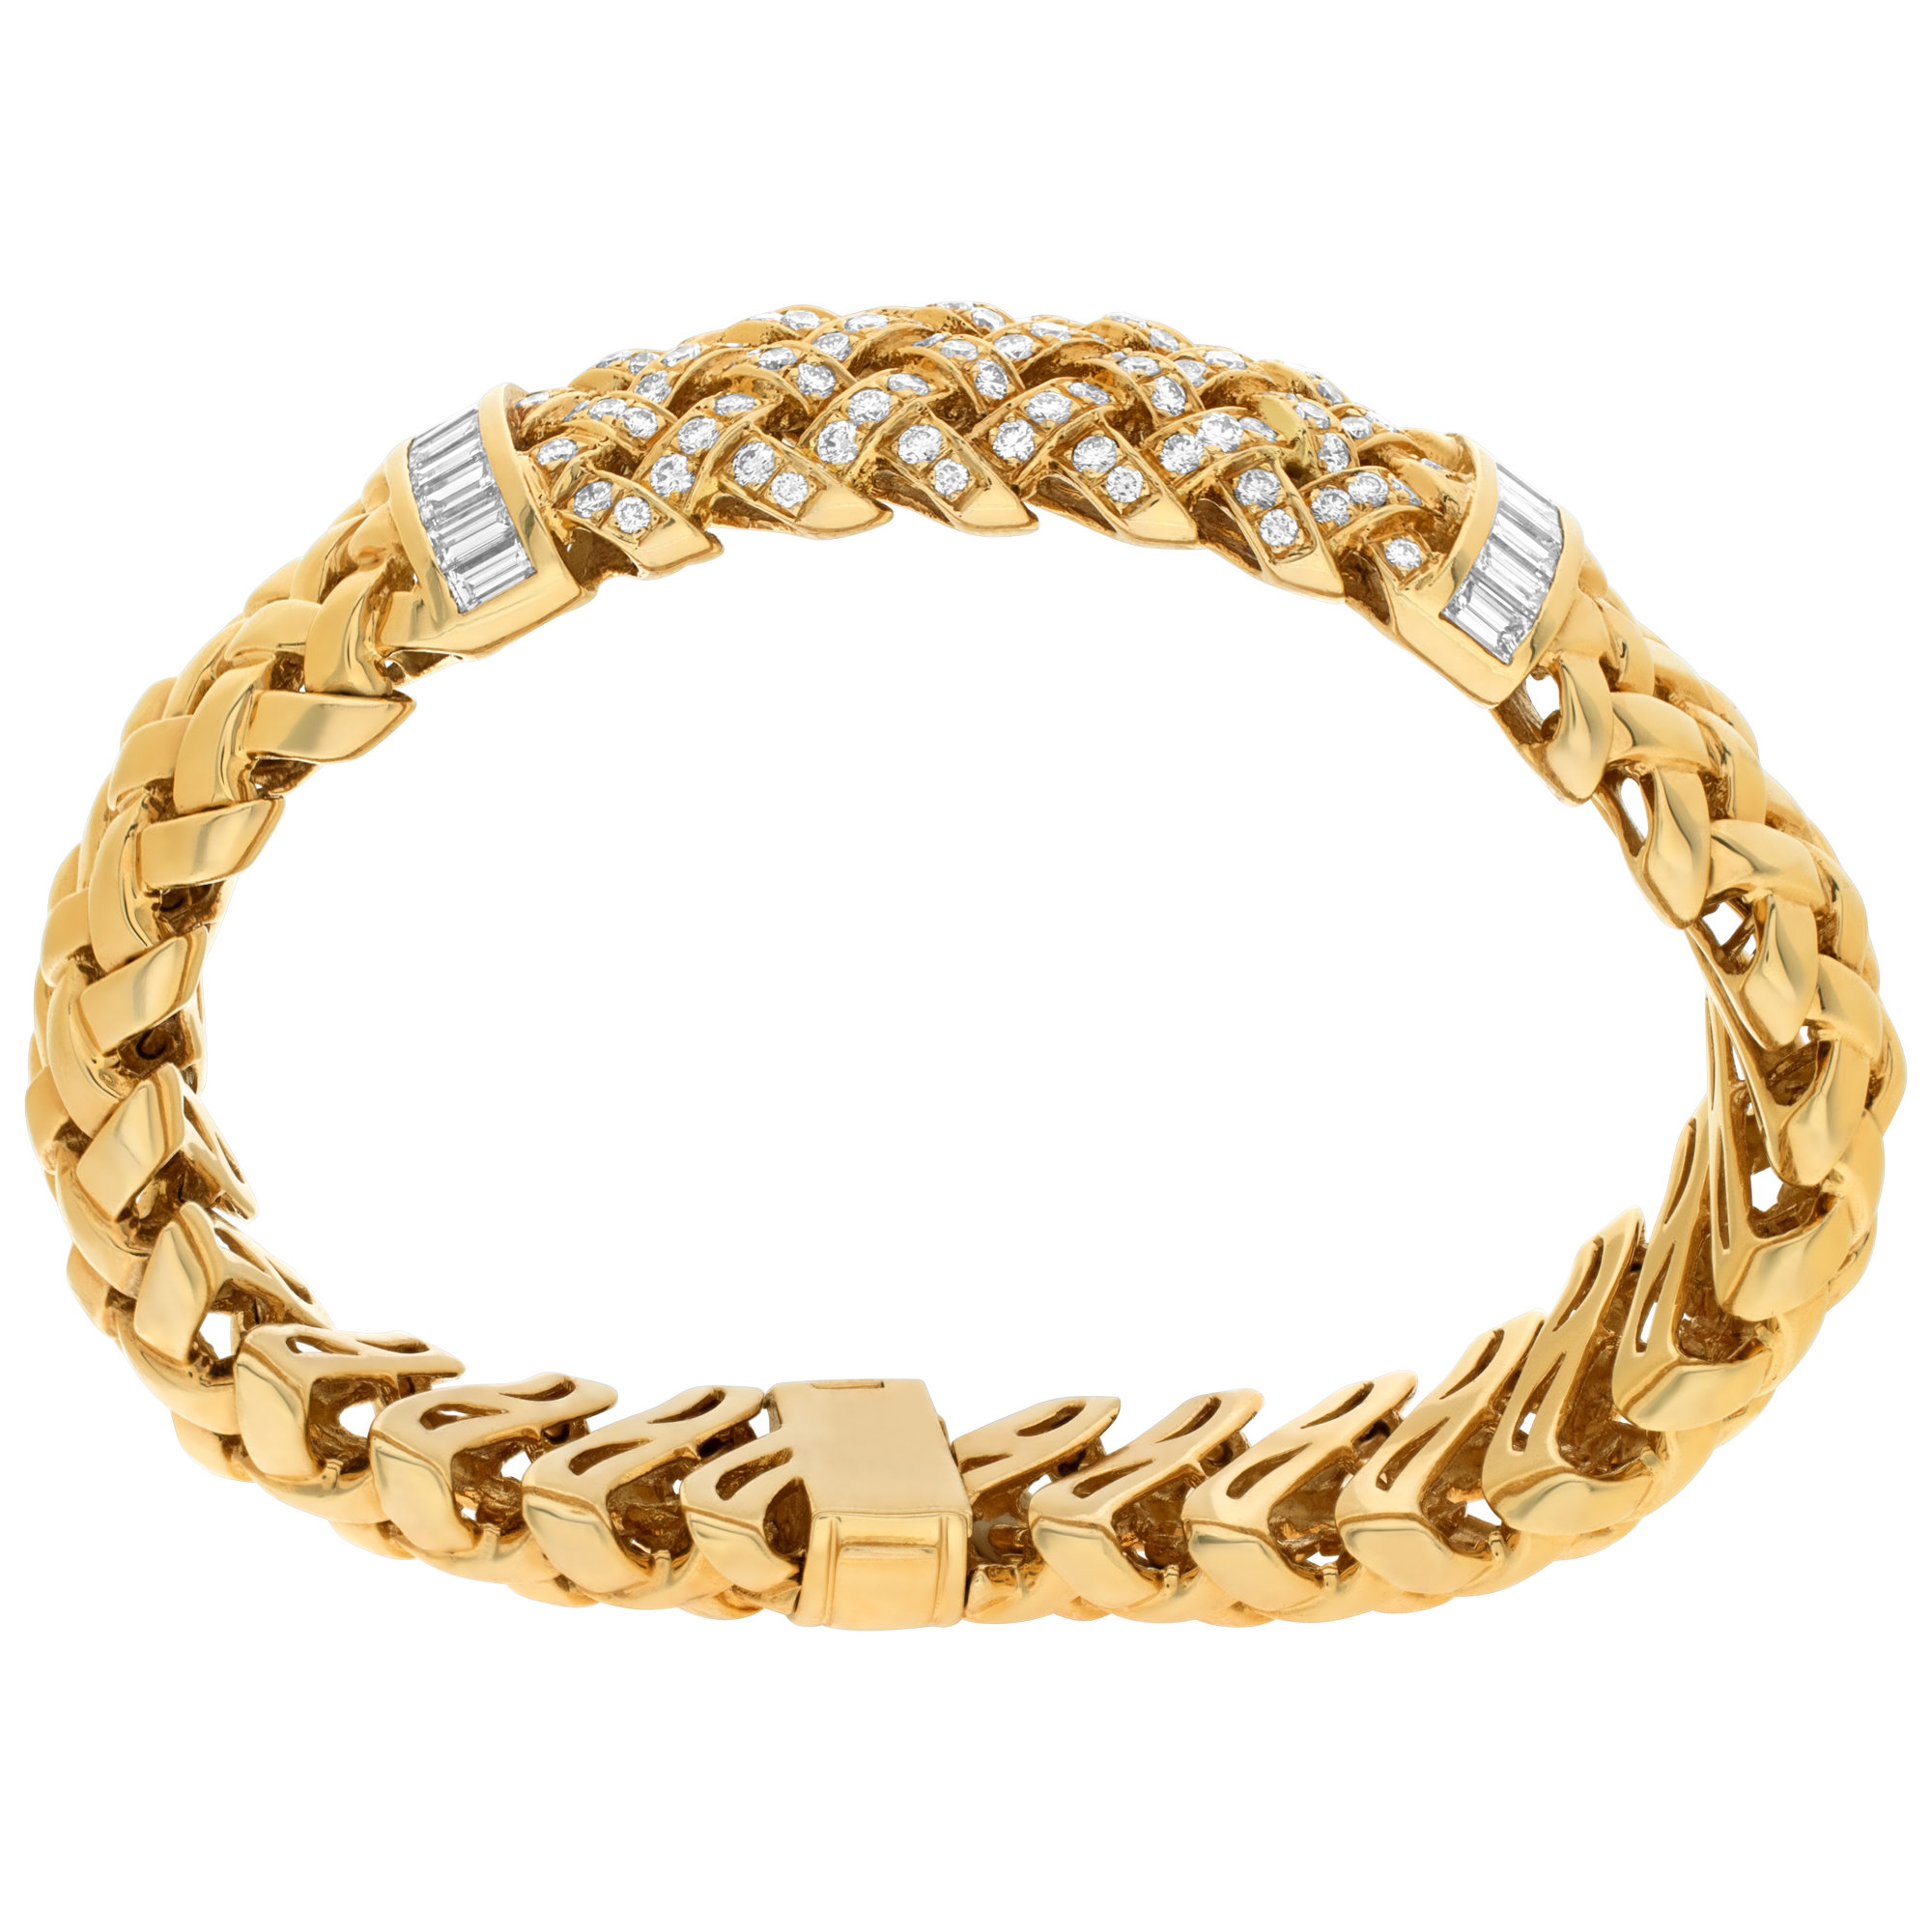 Tiffany & Co. VANNERIE Collection bracelet in 18K yellow gold image 5